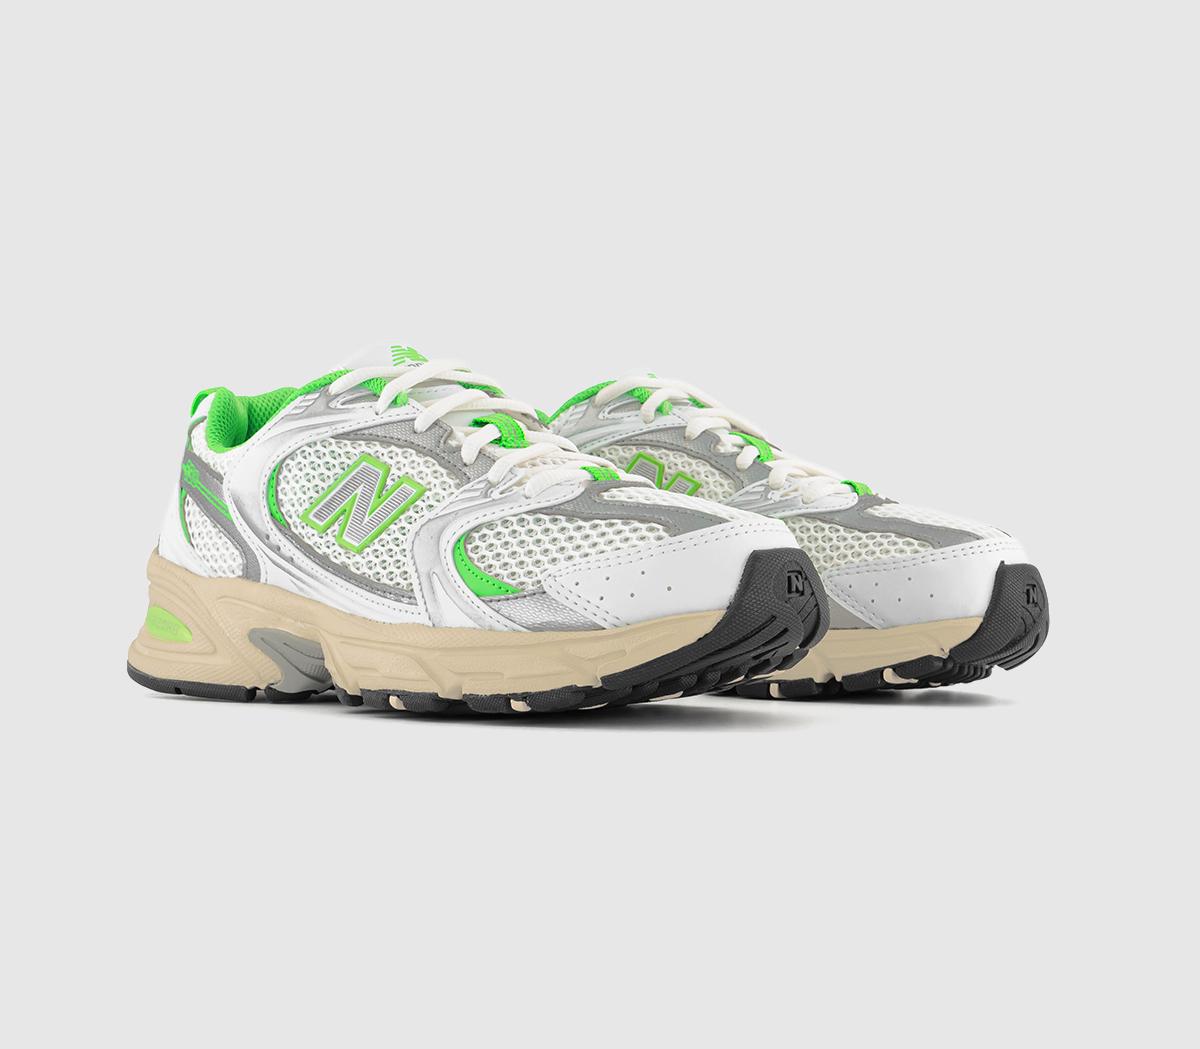 New Balance Womens Mr530 Trainers Off White Green Silver, 8